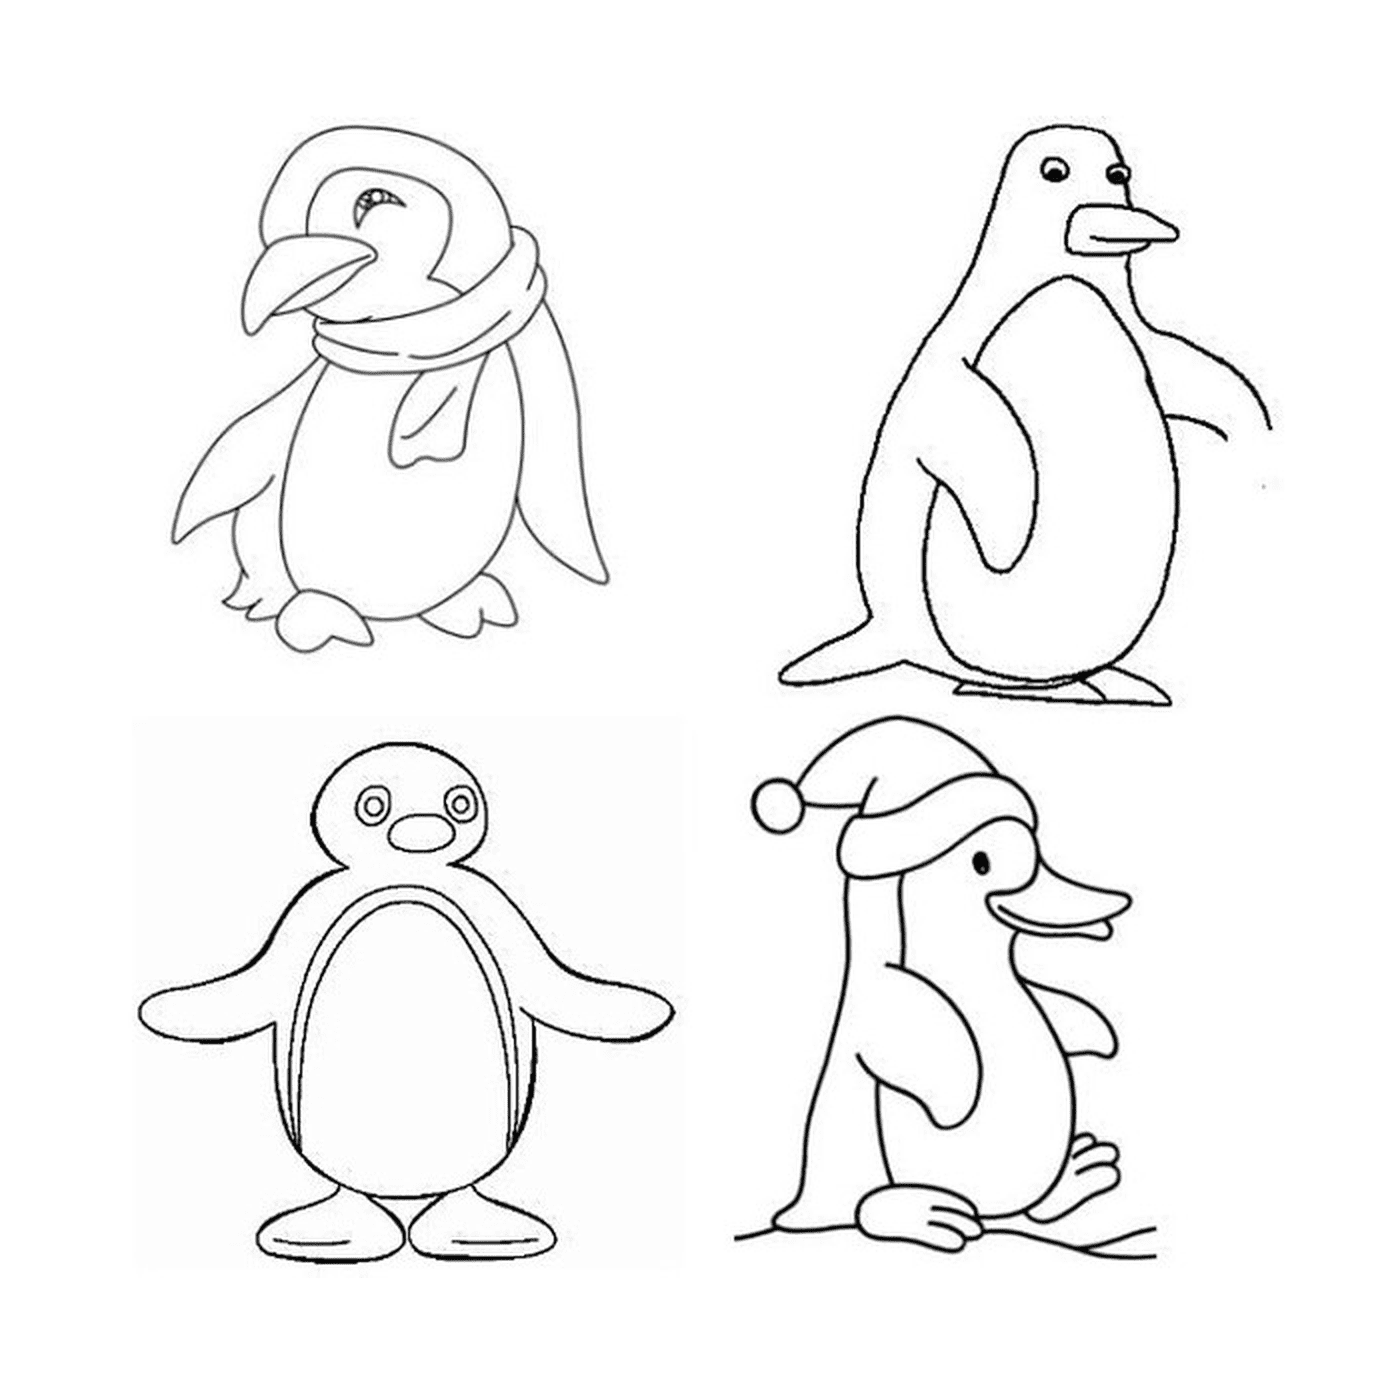  Four different penguins in drawing 